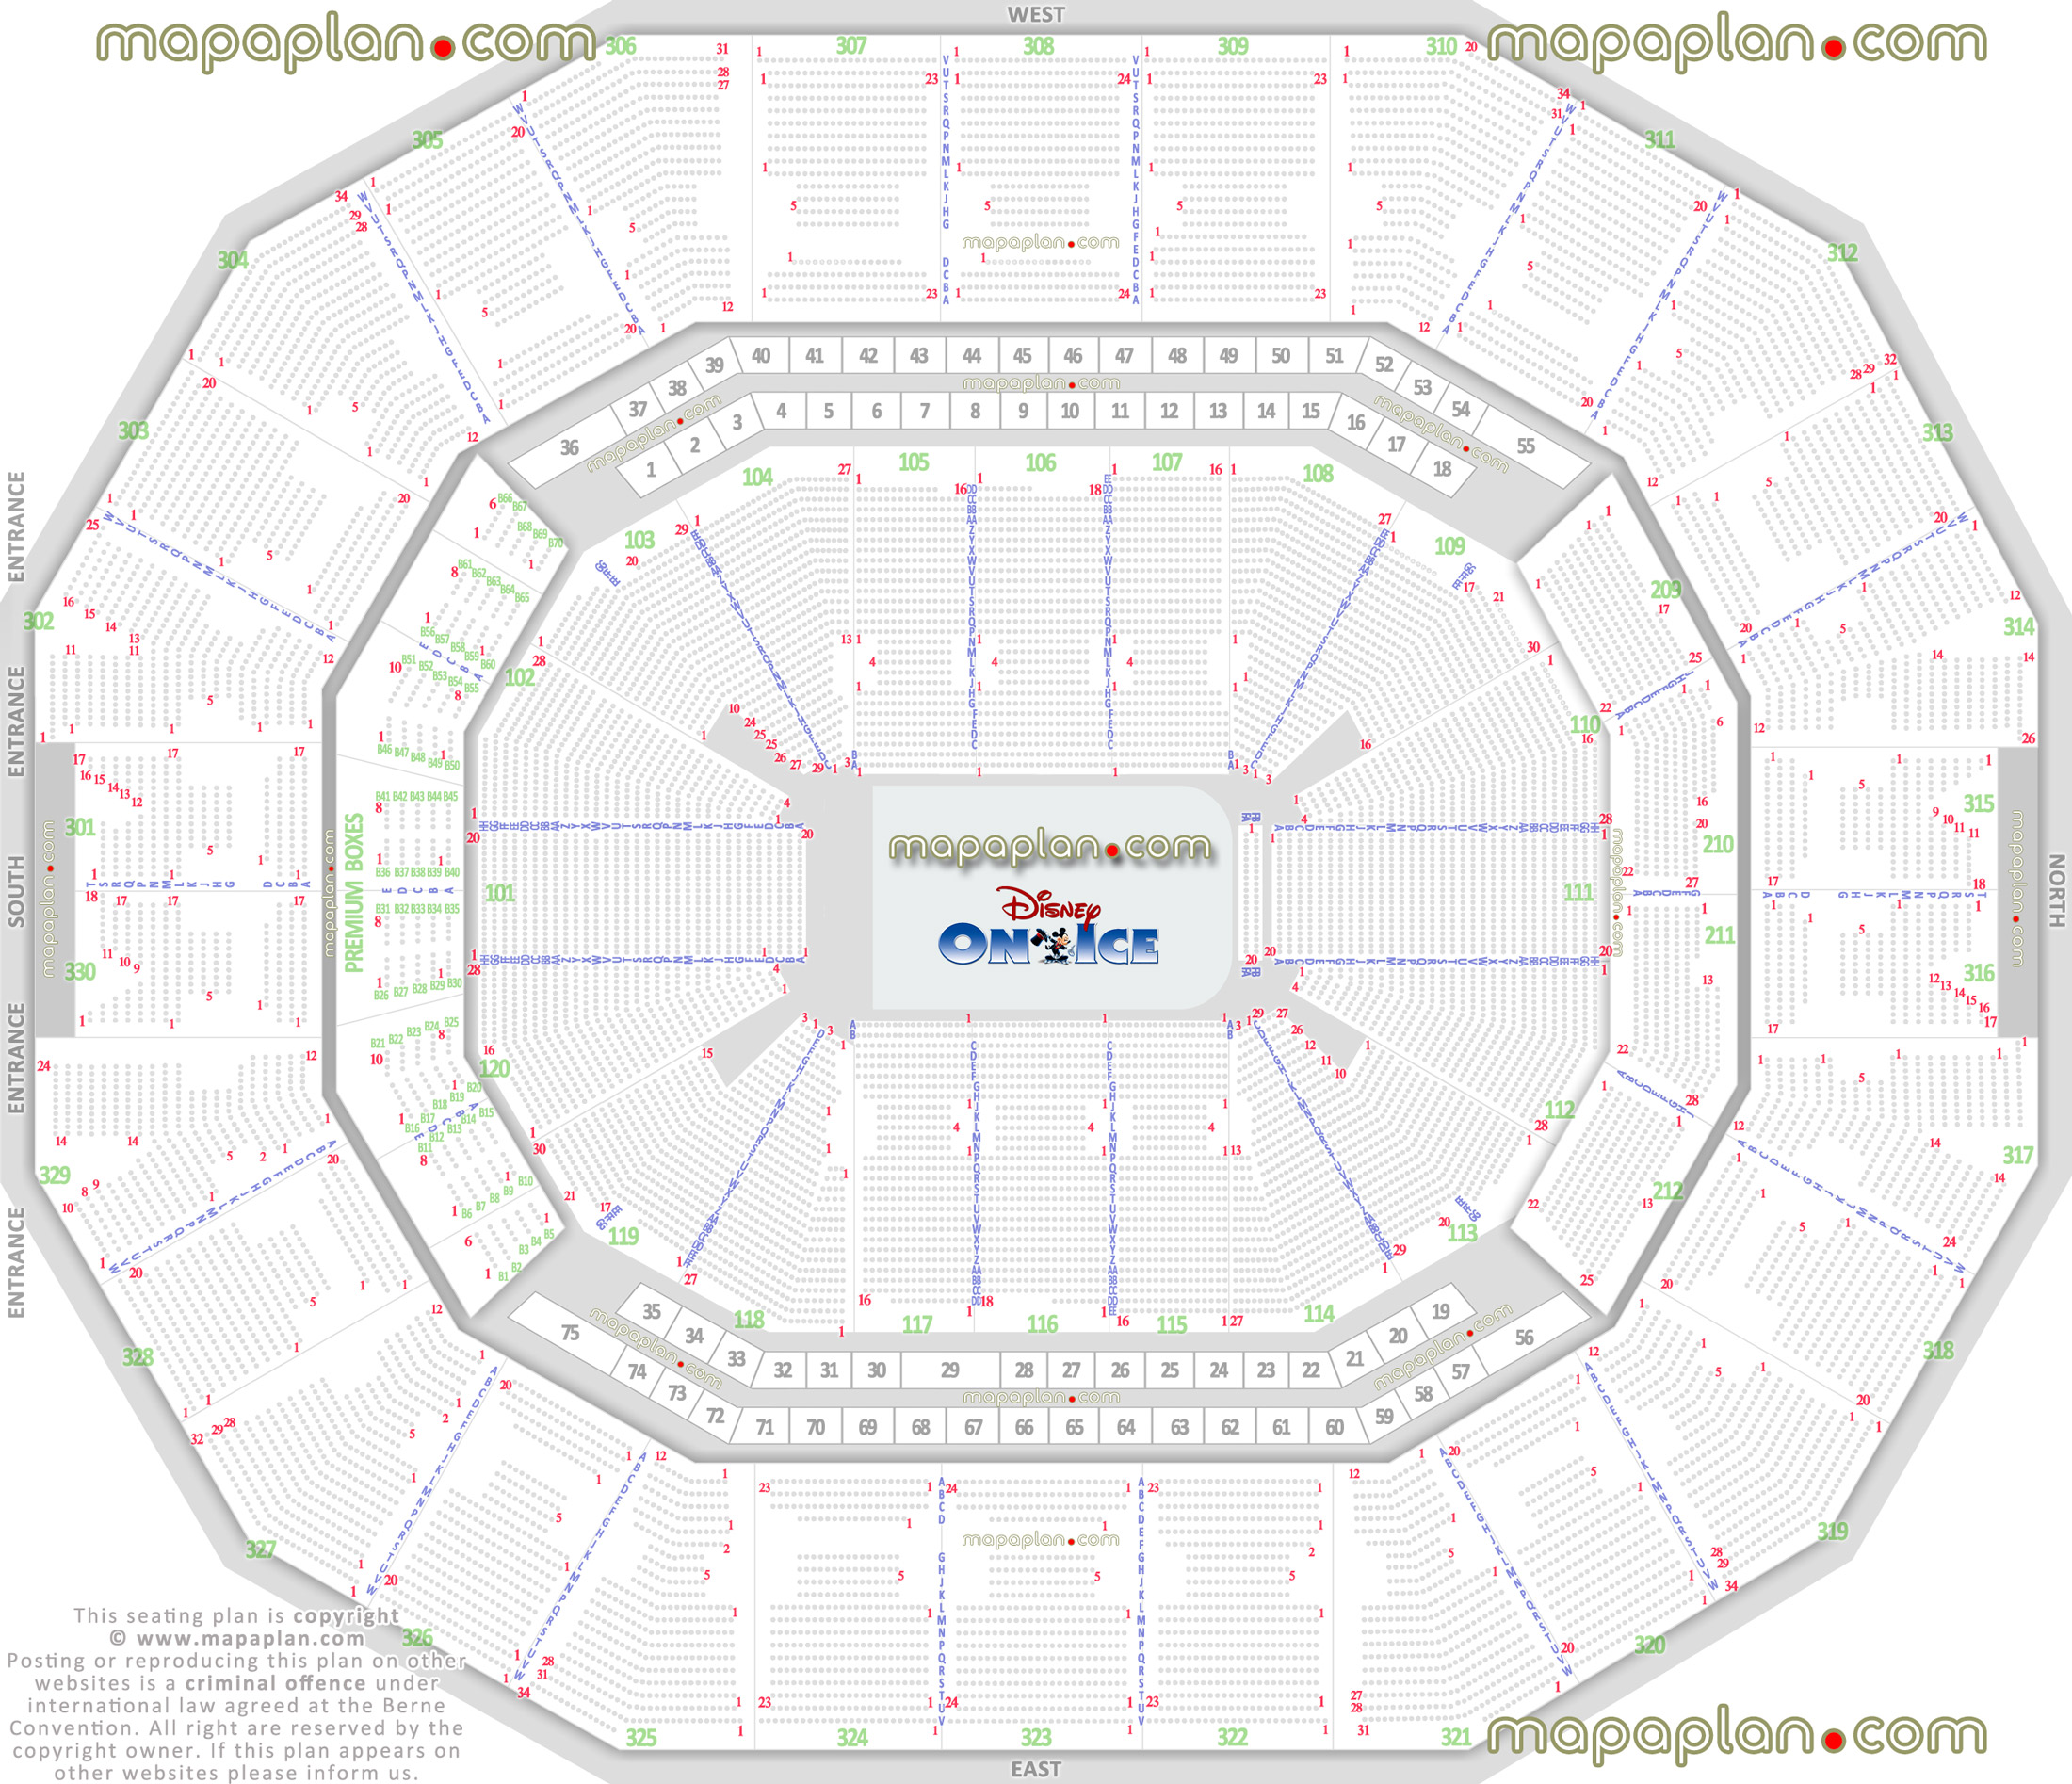 disney ice best seat finder tool precise detailed aisle row numbering location data plan plaza lower event terrace premium boxes upper levels balcony sections Louisville KFC Yum! Center seating chart